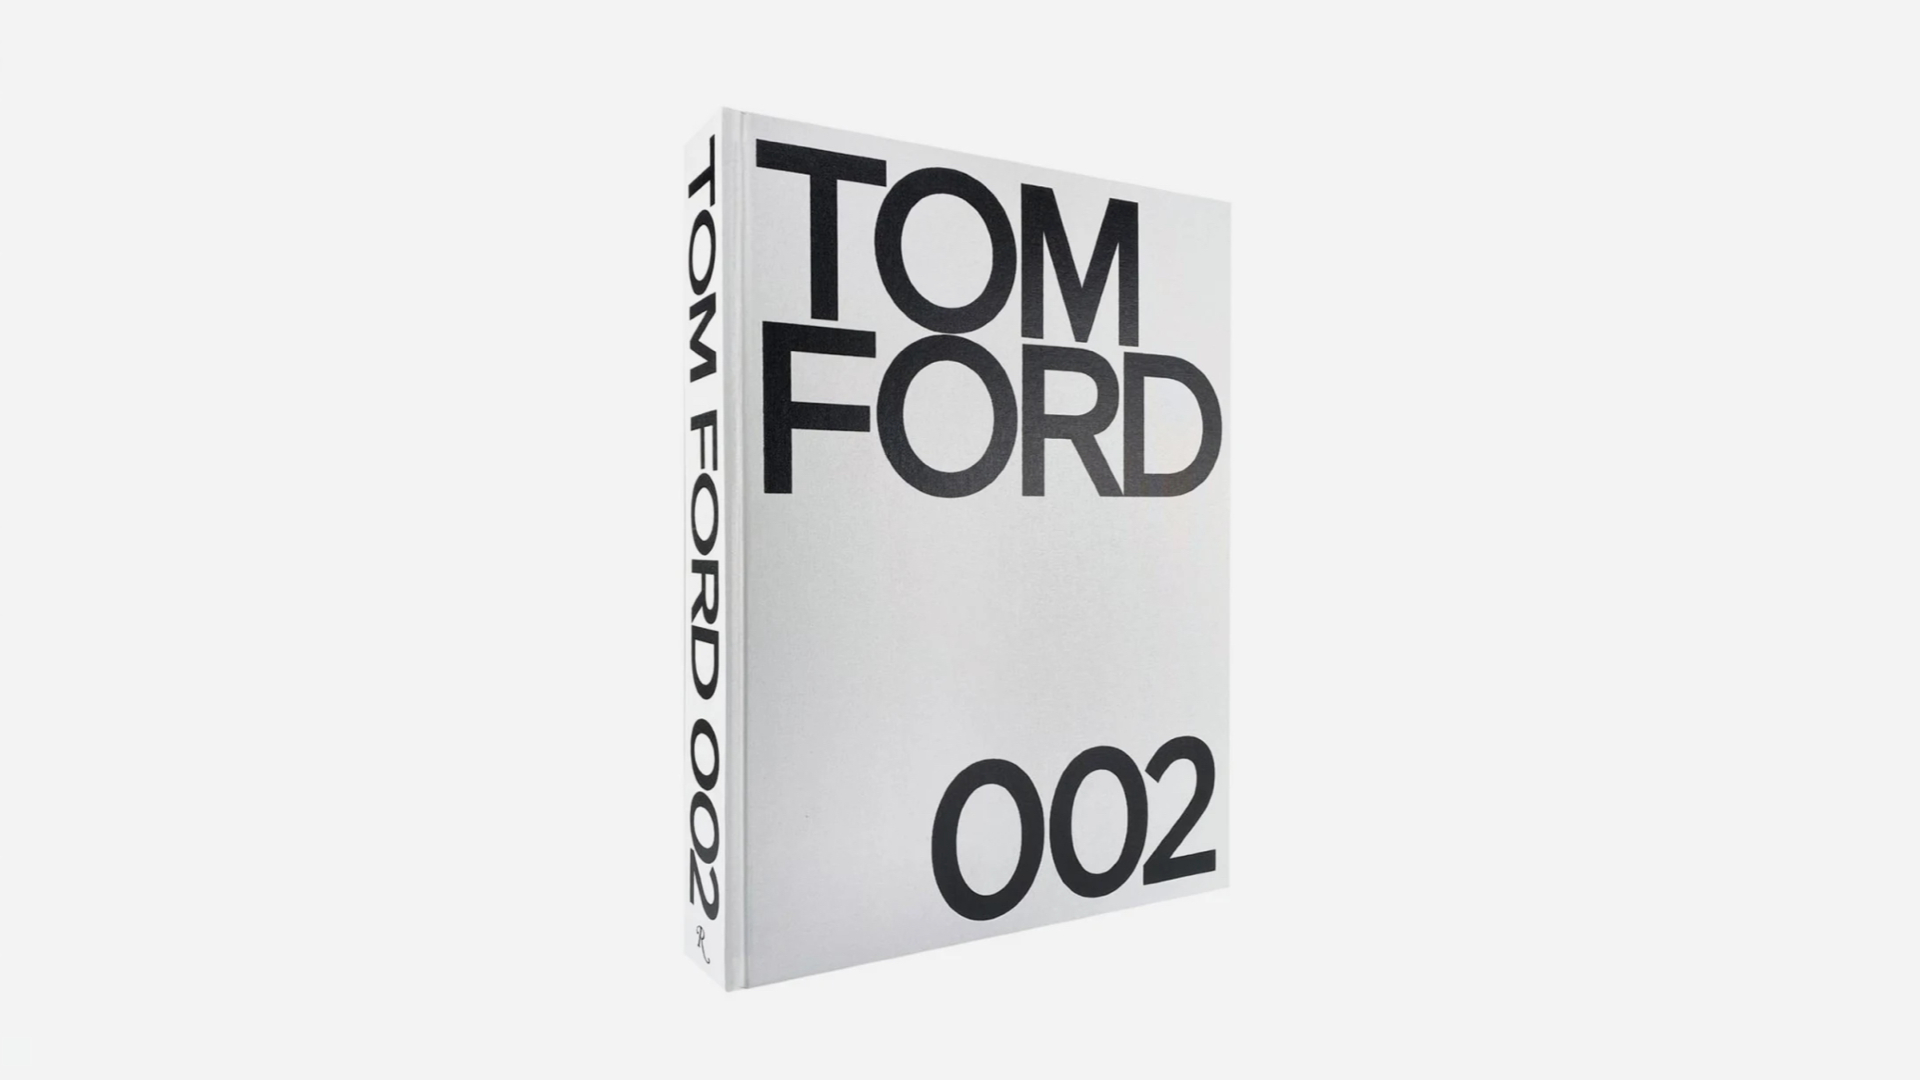 After 17 Years, Tom Ford Is Releasing His Second Coffee Table Book